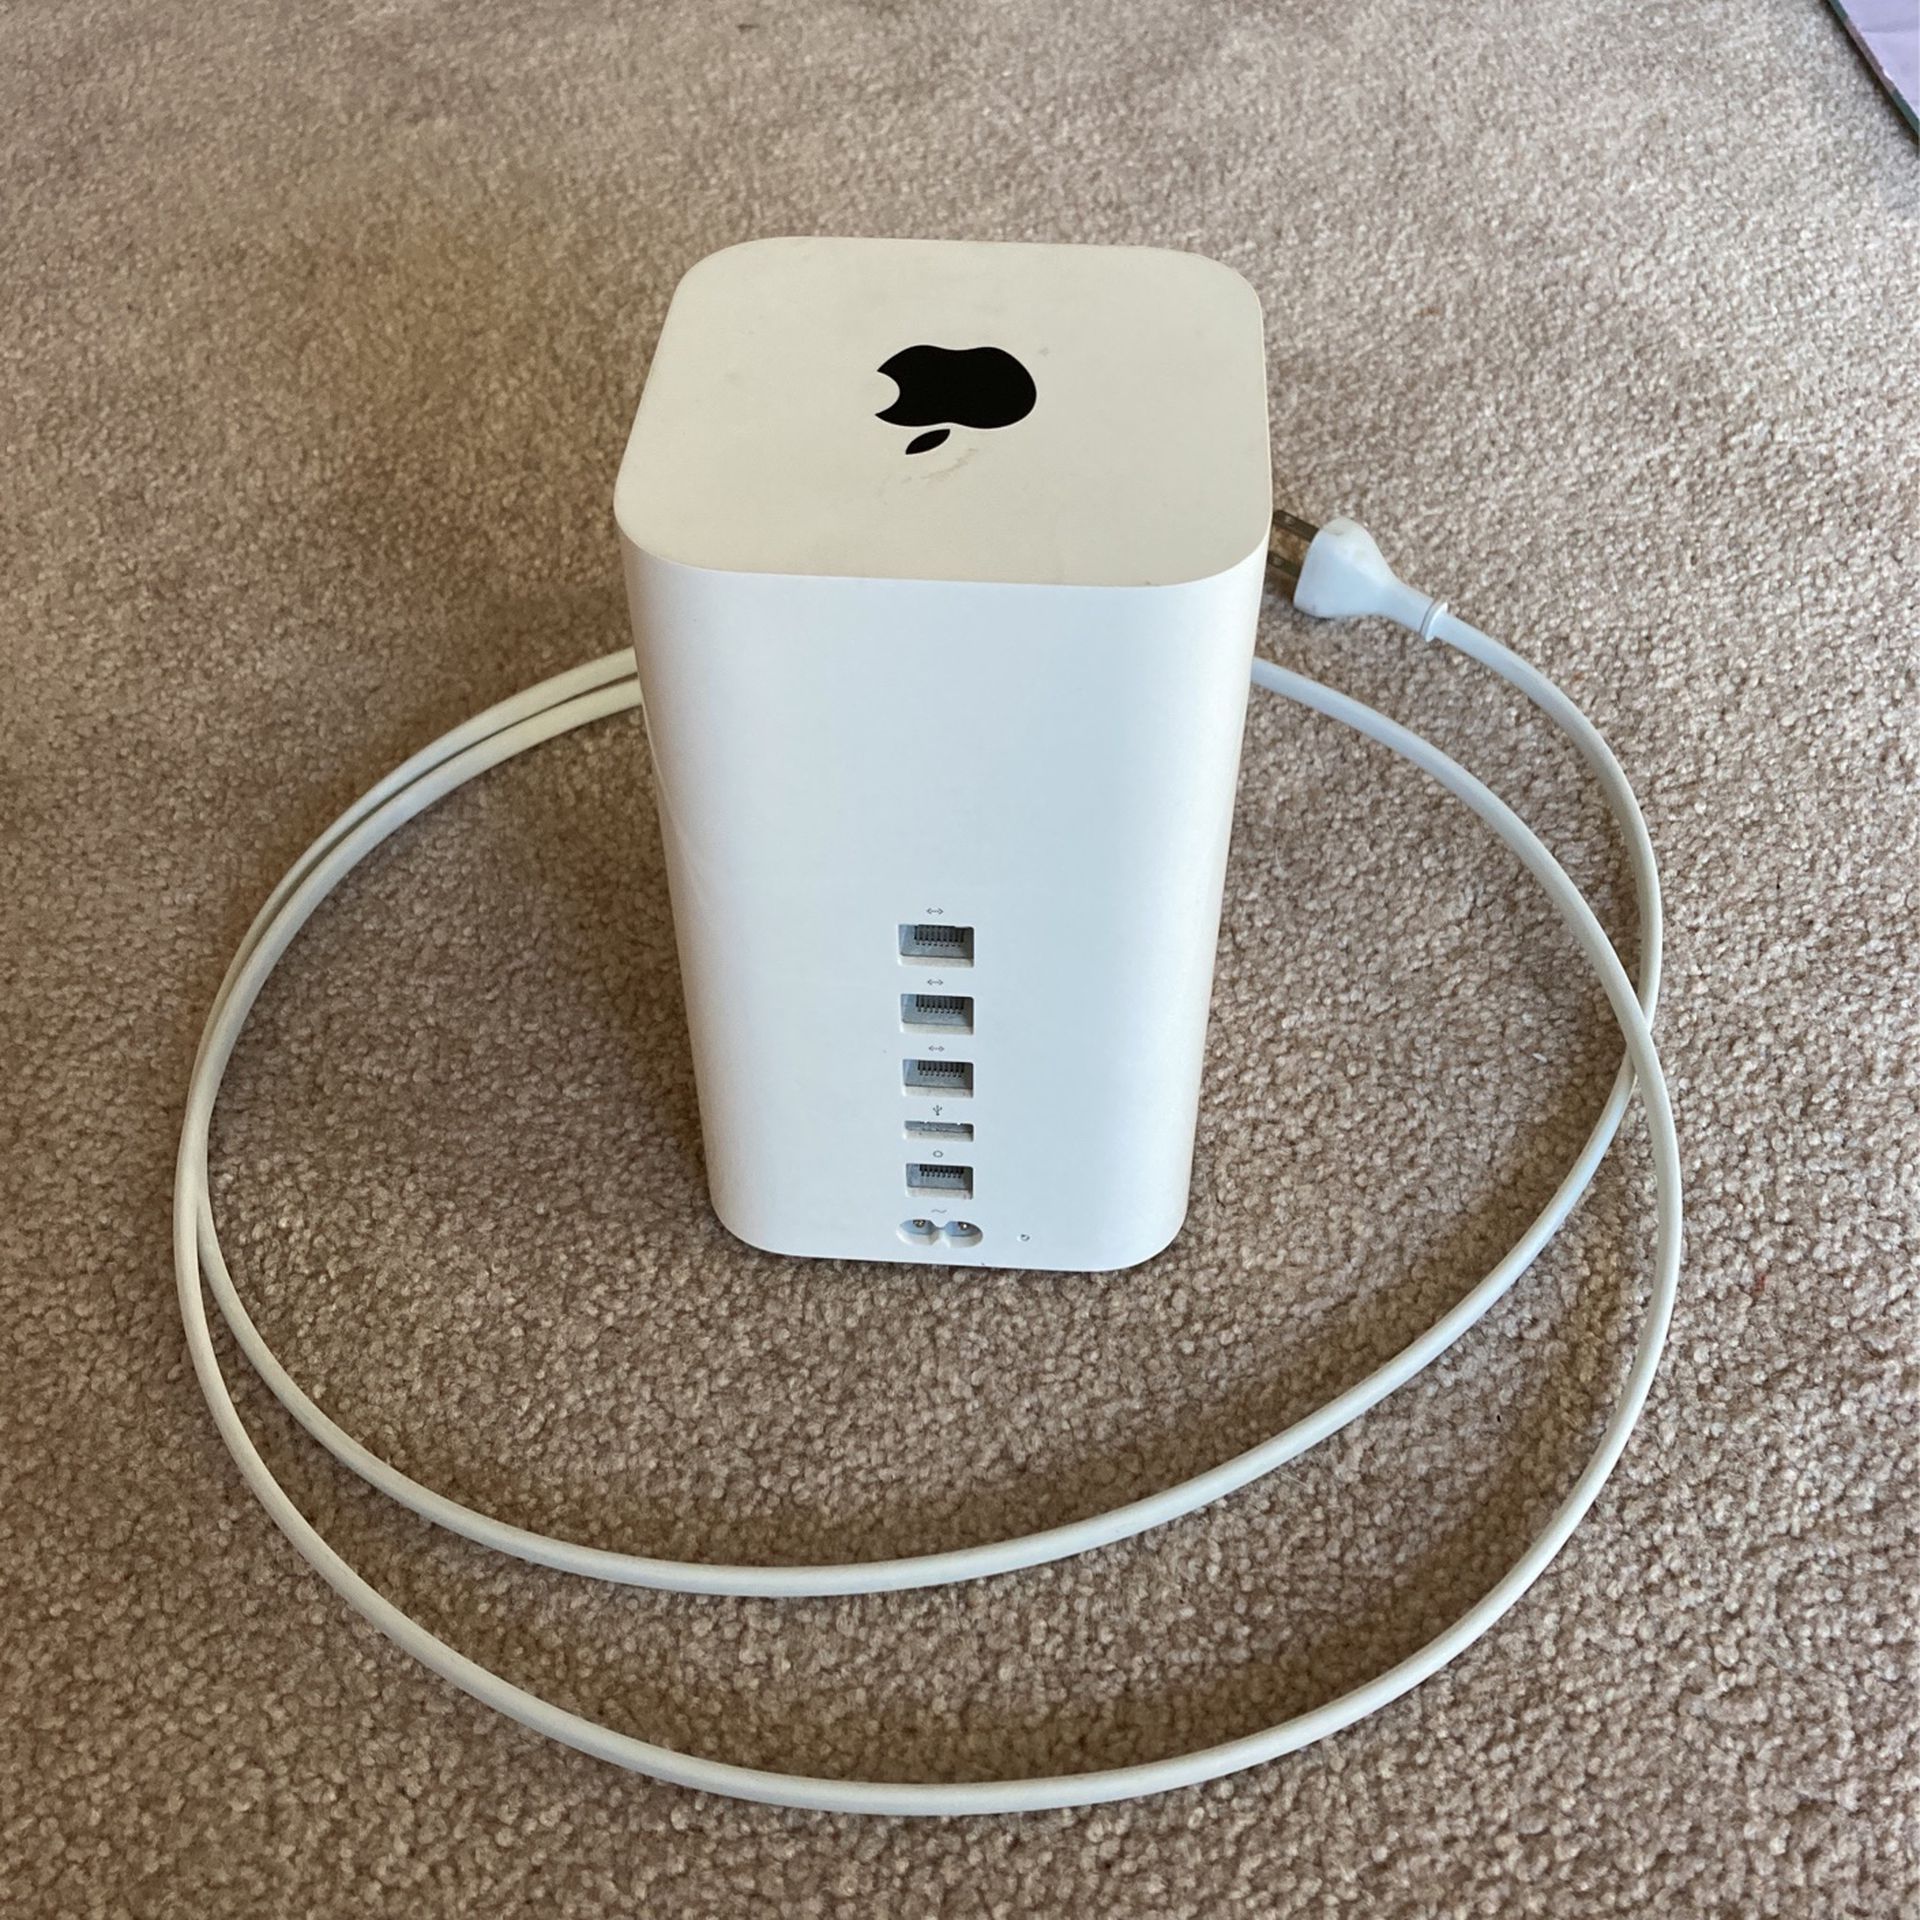 AirPort Time Capsule, 5th Generation (2 TB)